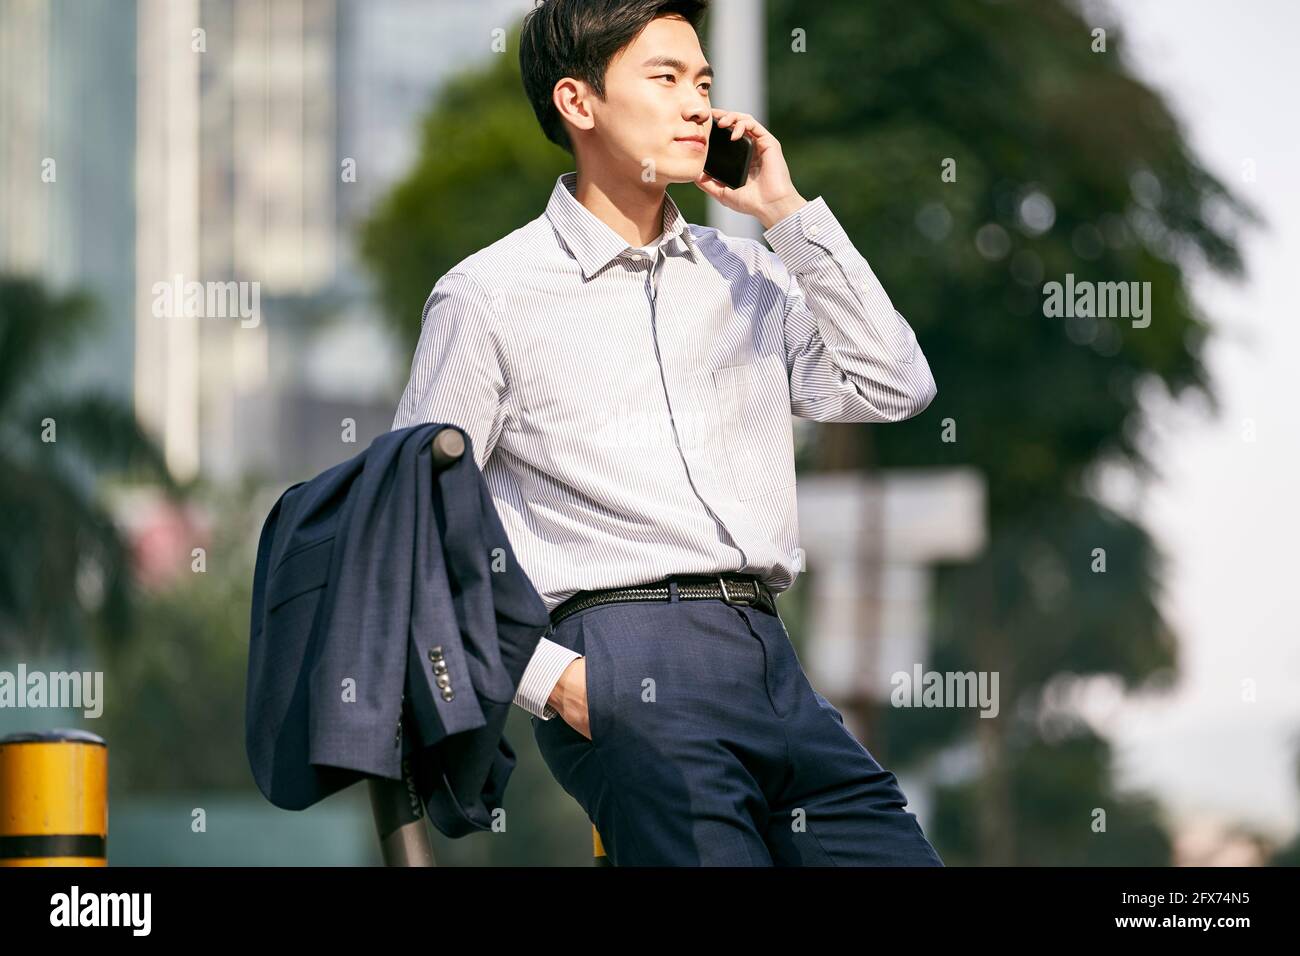 young asian businessman standing next to his electric scooter on street making a call using cellphone in downtow of modern city Stock Photo